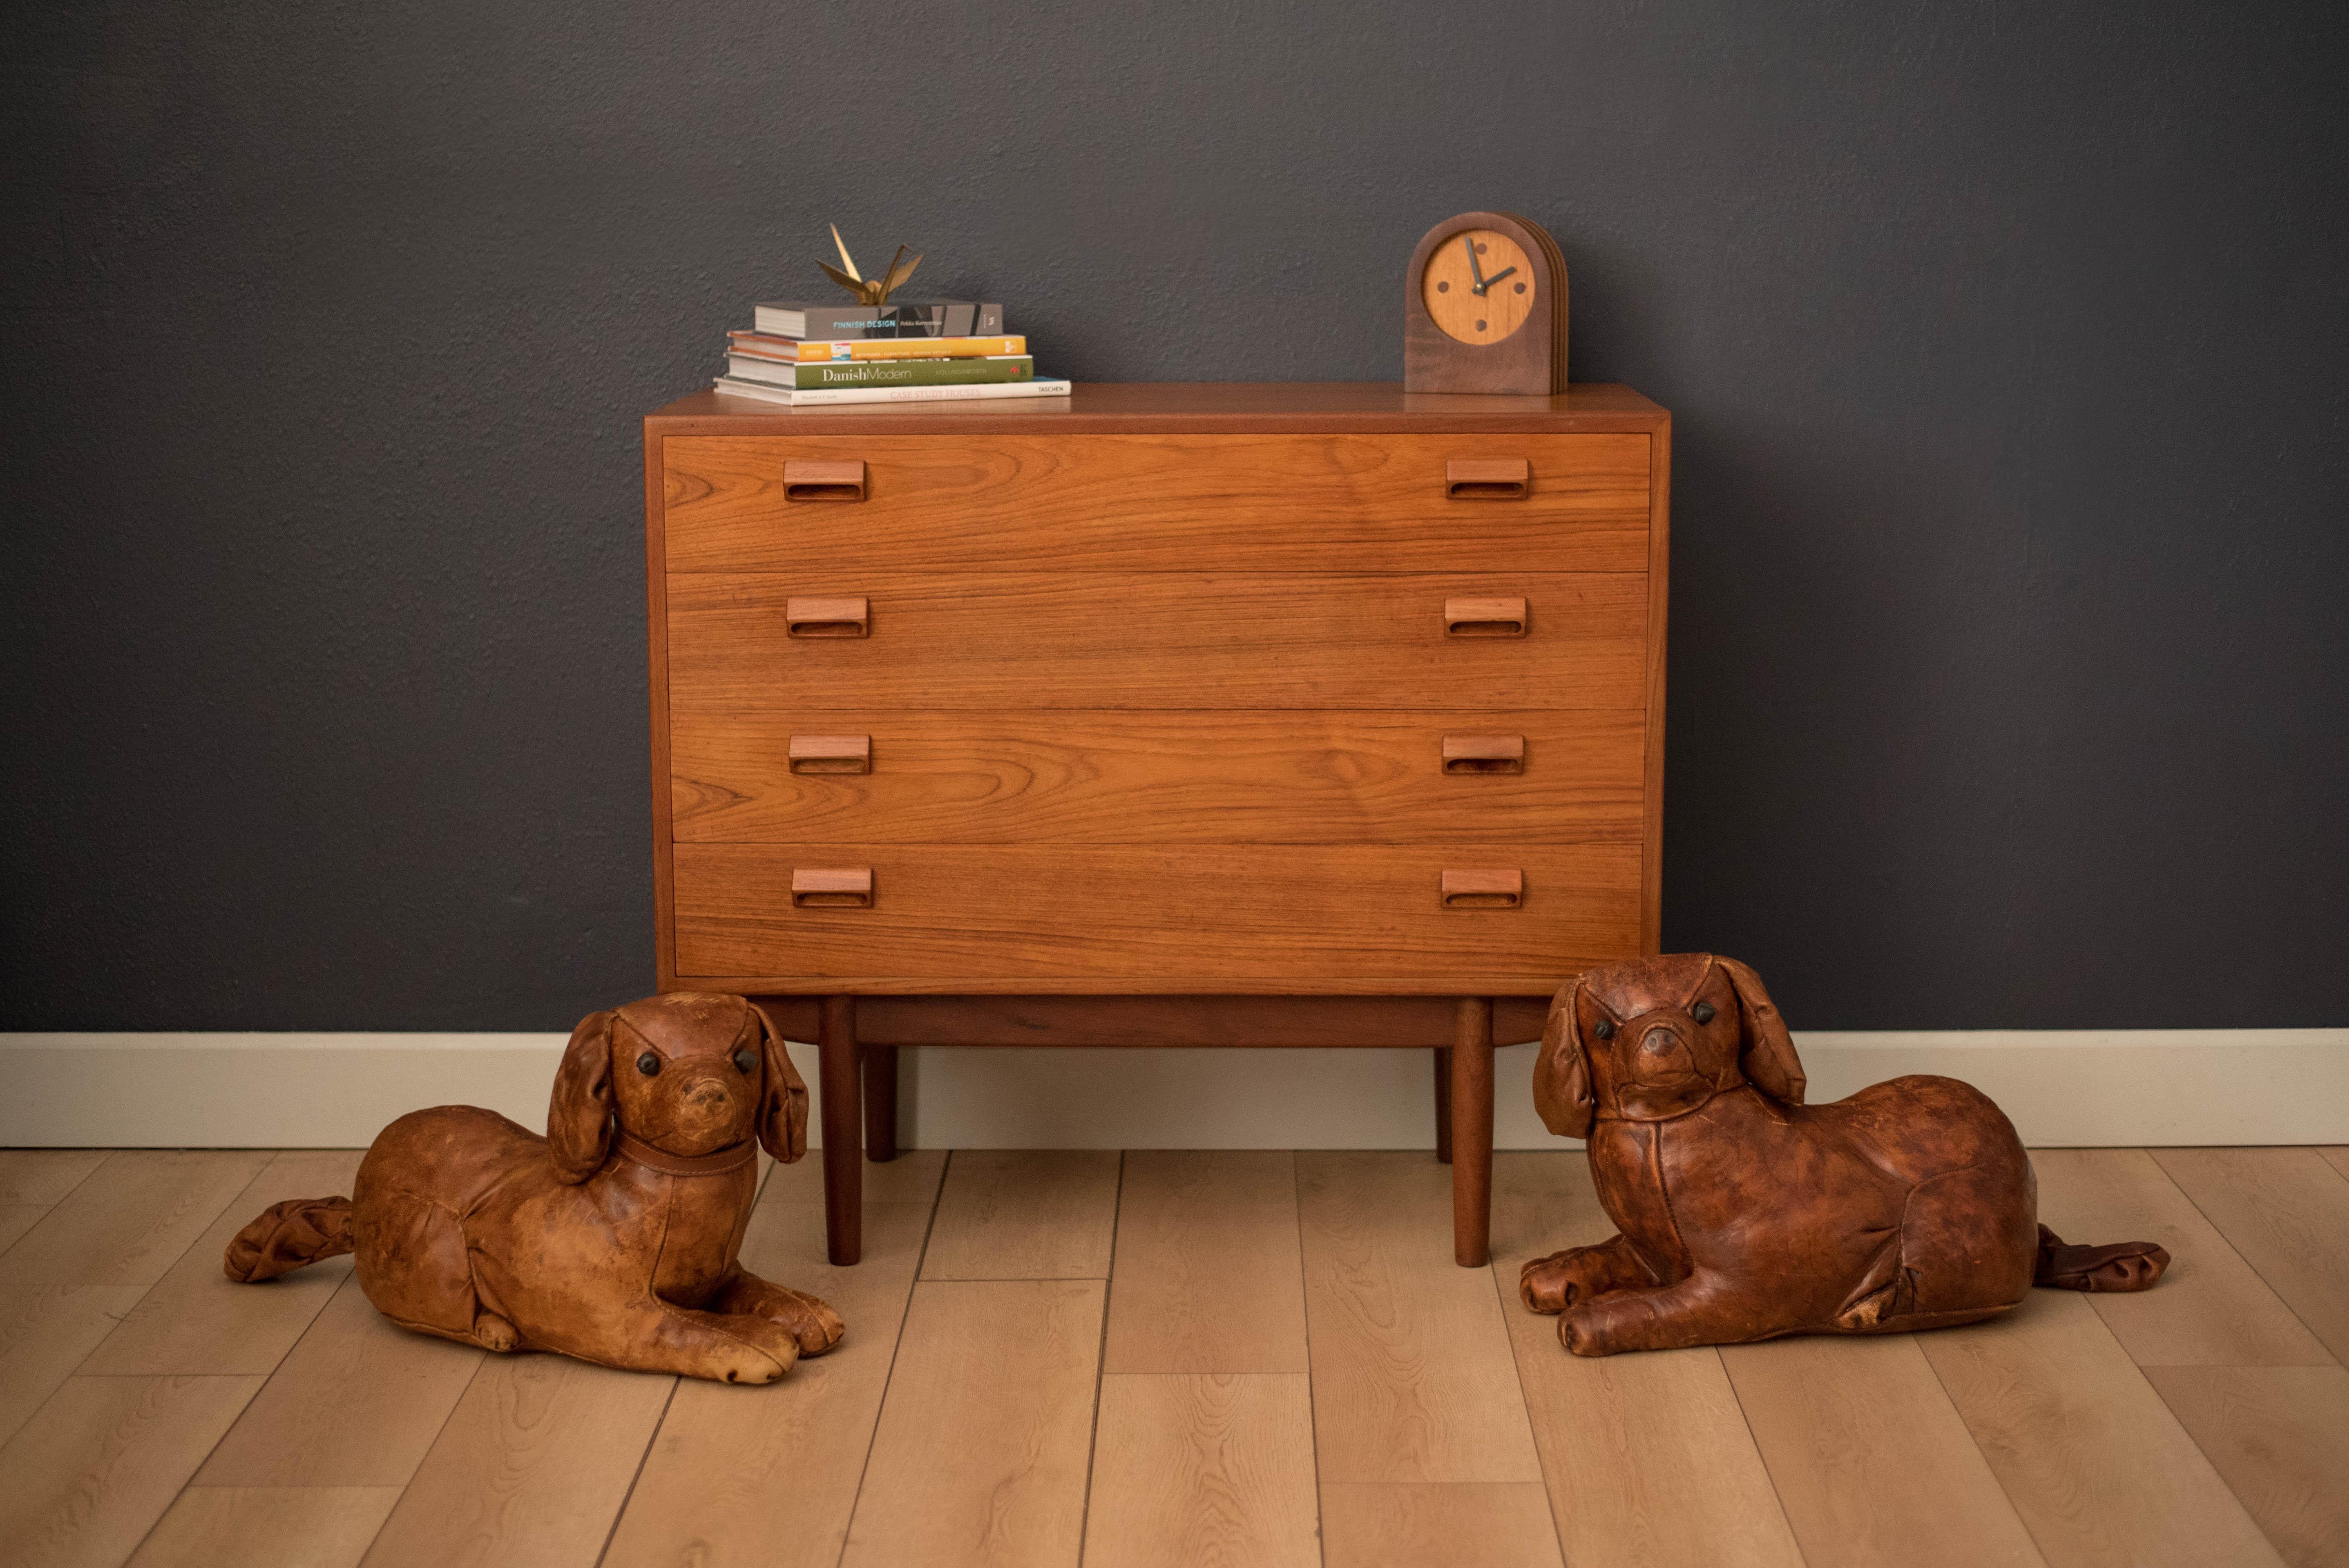 Mid-Century Modern pair of leather dogs designed by Dimitri Omersa for Abercrombie & Fitch. This decorative set is handstitched and displays a rustic aged leather patina. Price is for the pair.